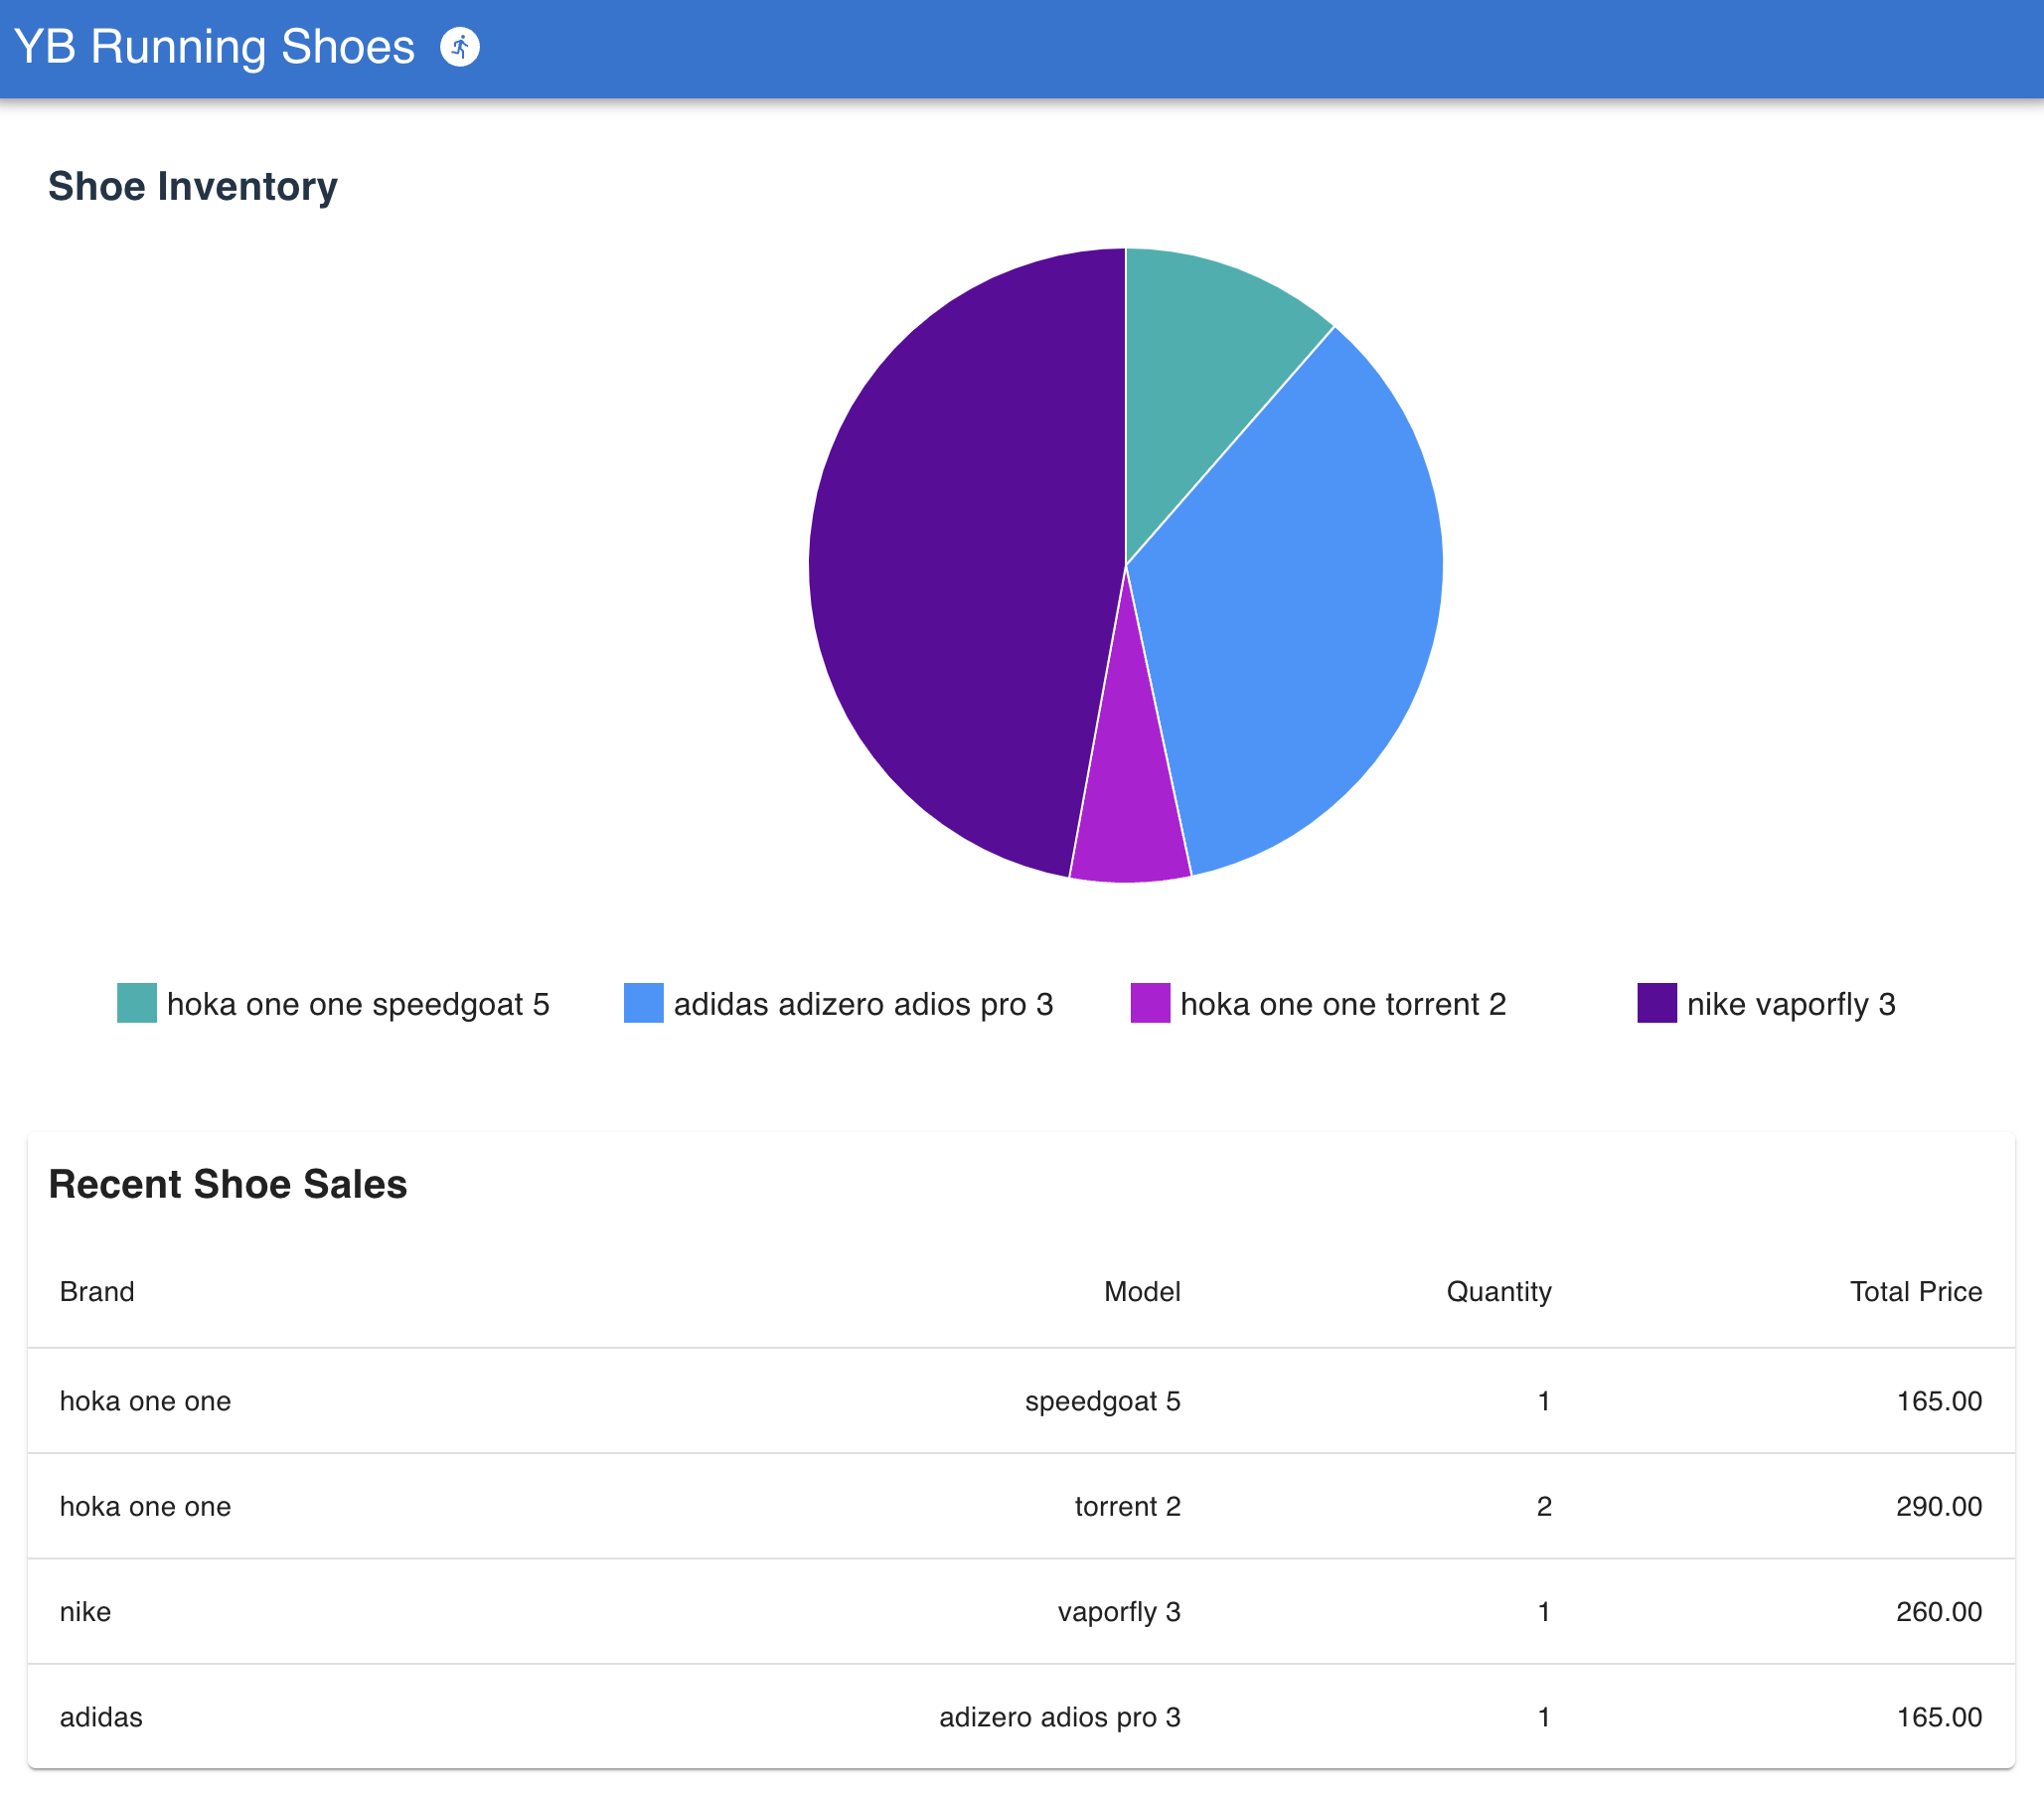 Azure App Service web application displaying shoe inventory and recent sales from YugabyteDB